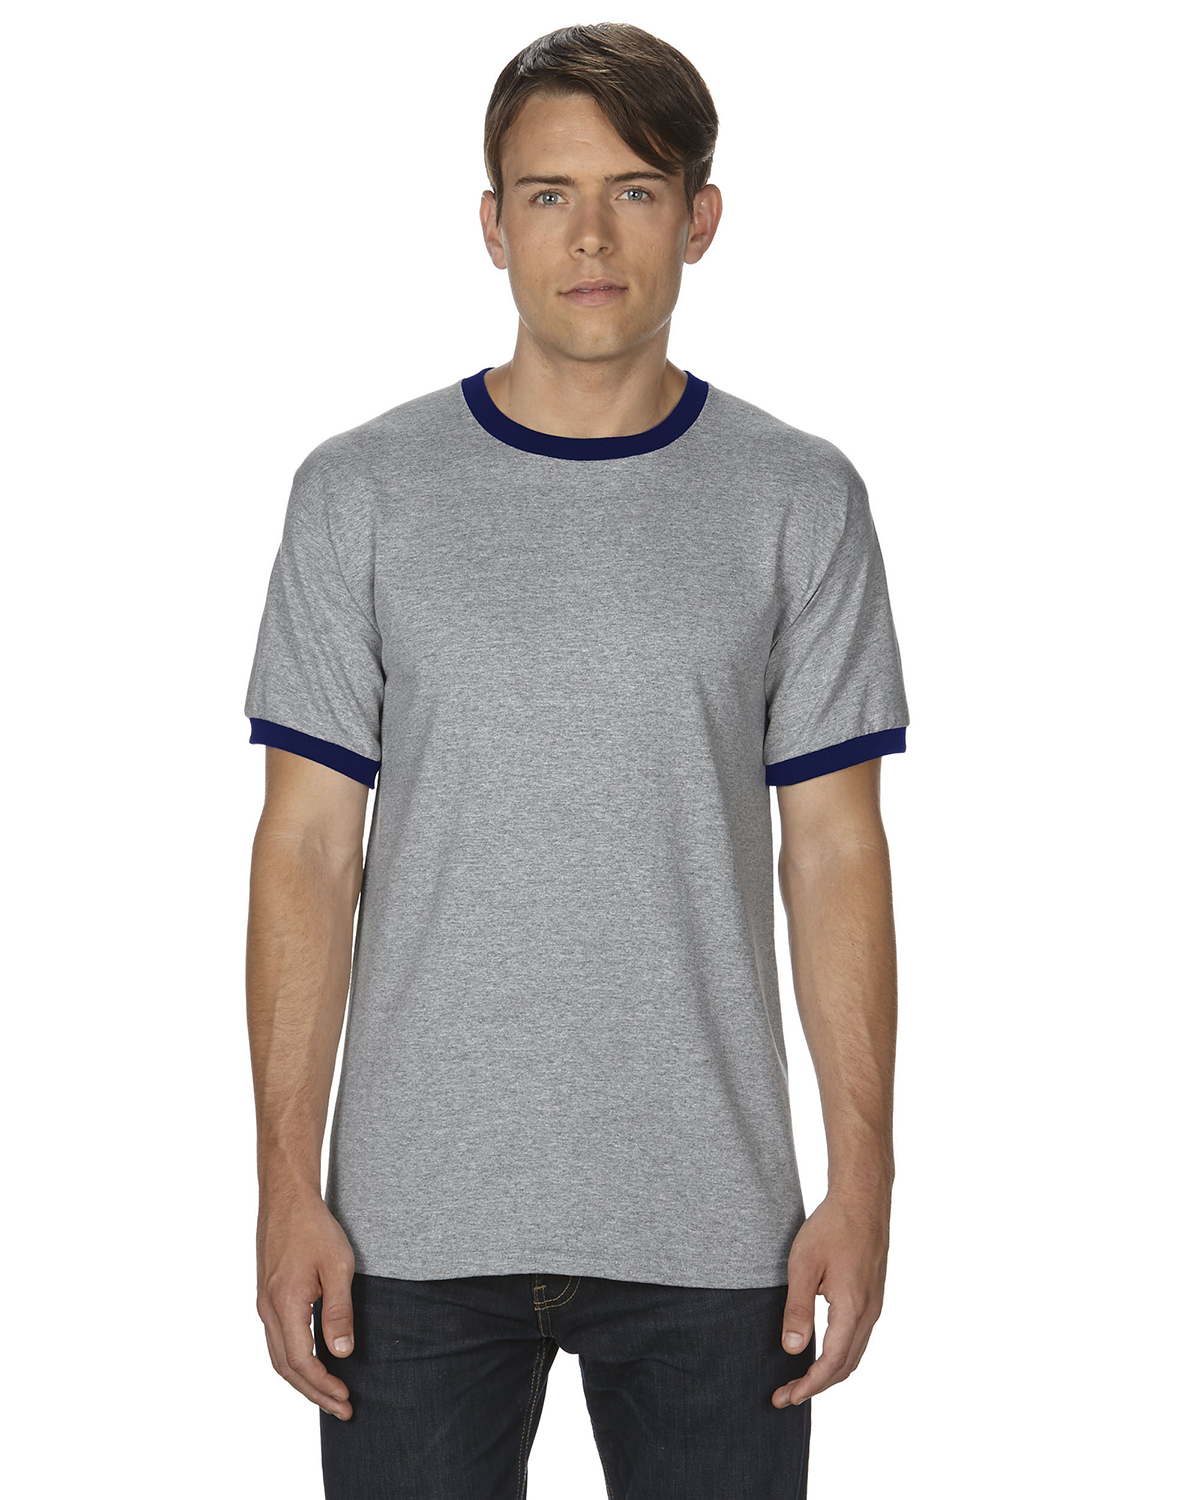 click to view SPORT GREY/NAVY